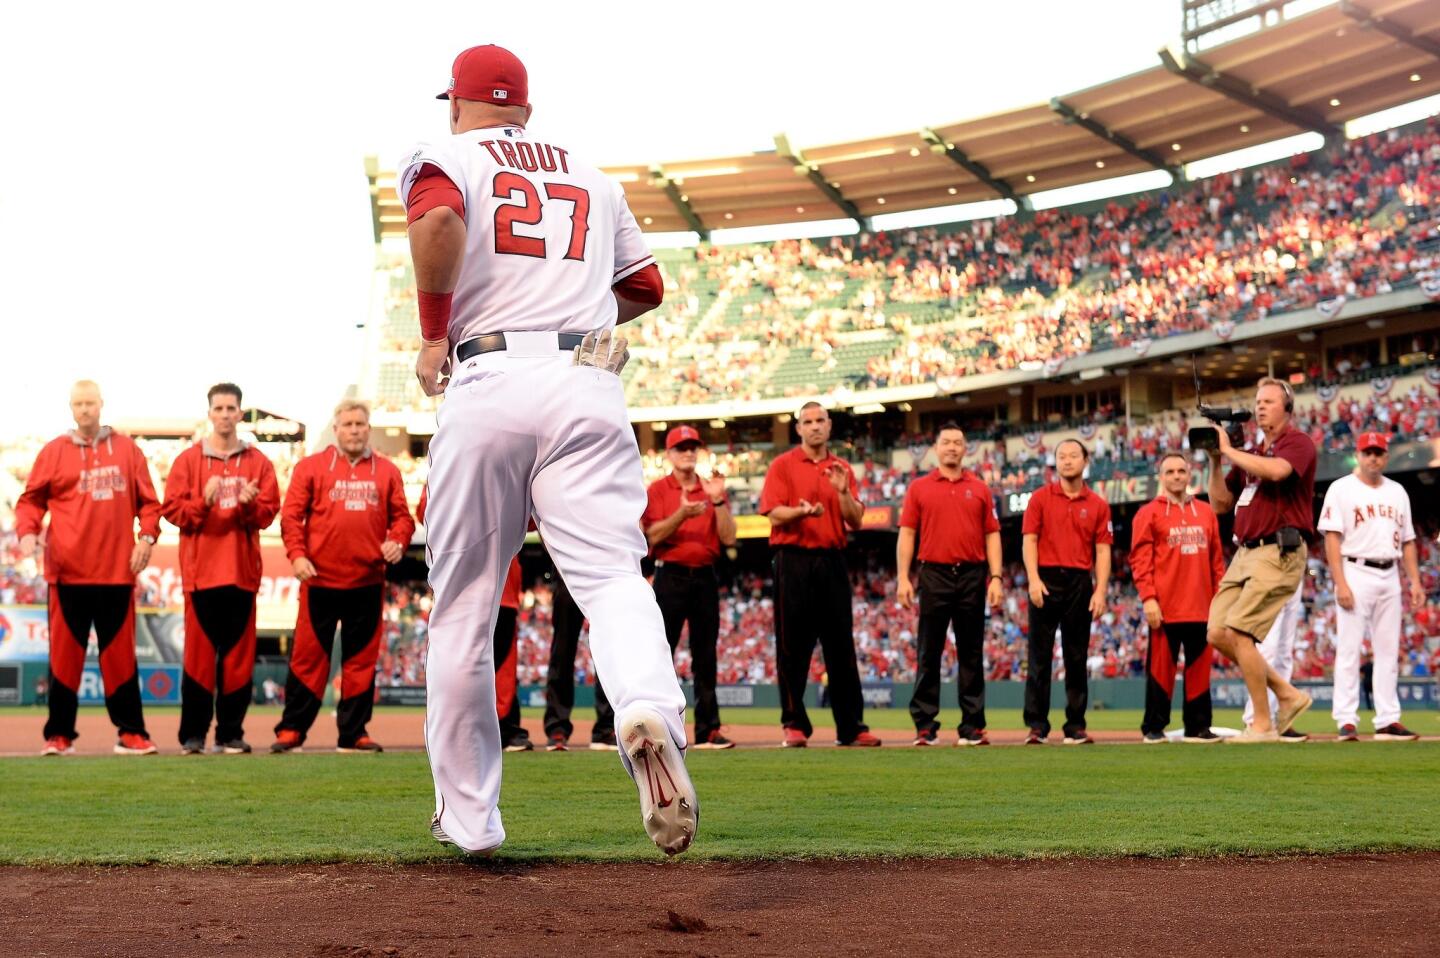 Angels star Mike Trout